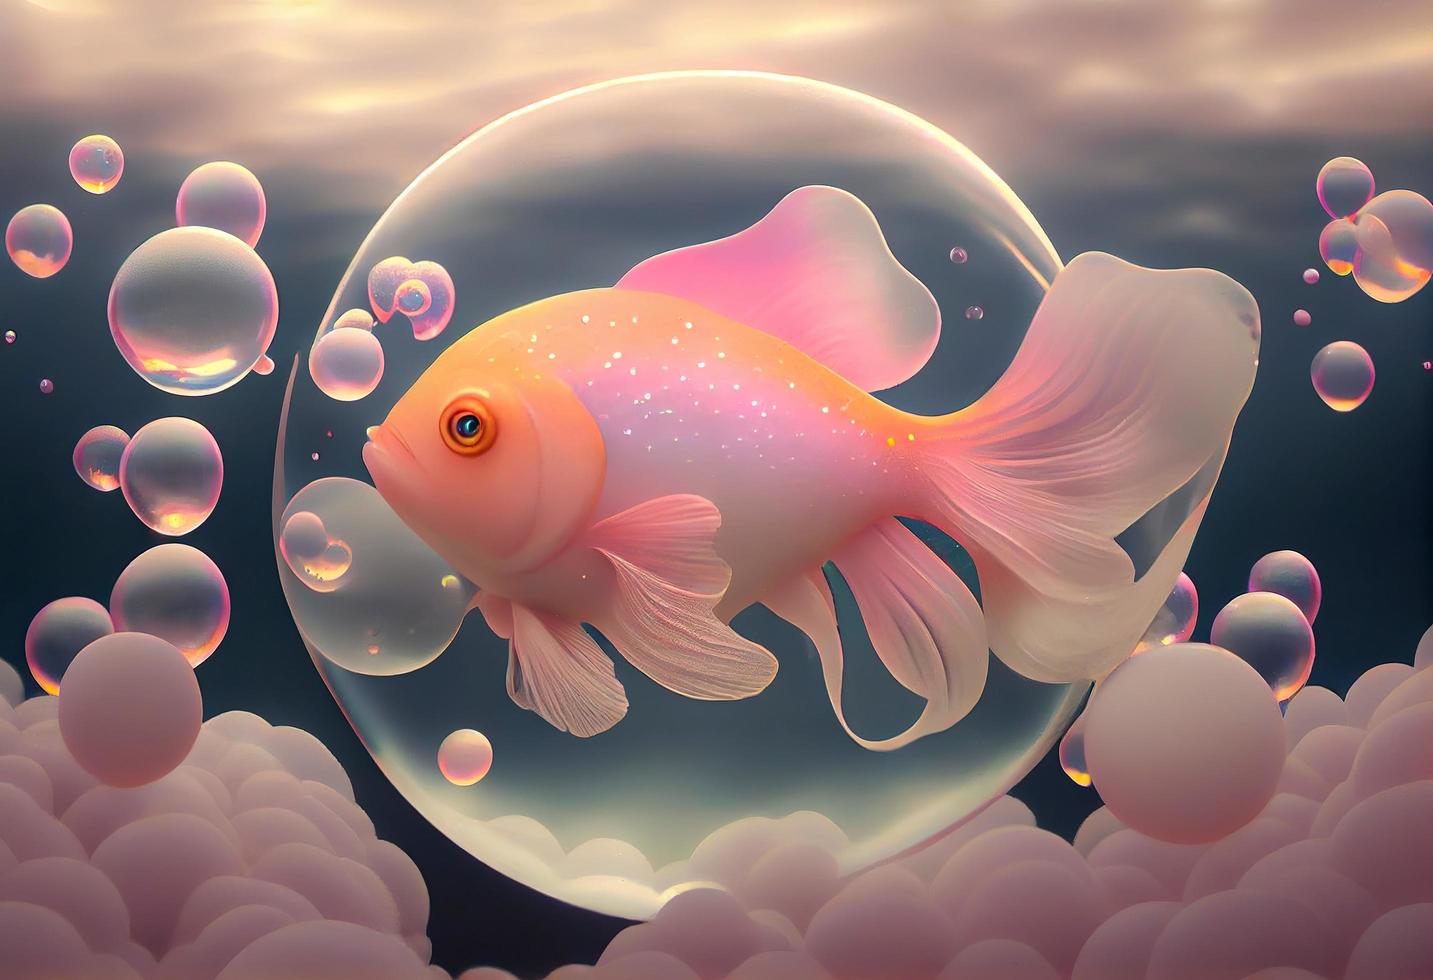 A surrealistic hyperrealistic fairytale cute cuddle fish. The background is a landscape with peach, pink and iridescent soap bubbles floating around, generat ai photo